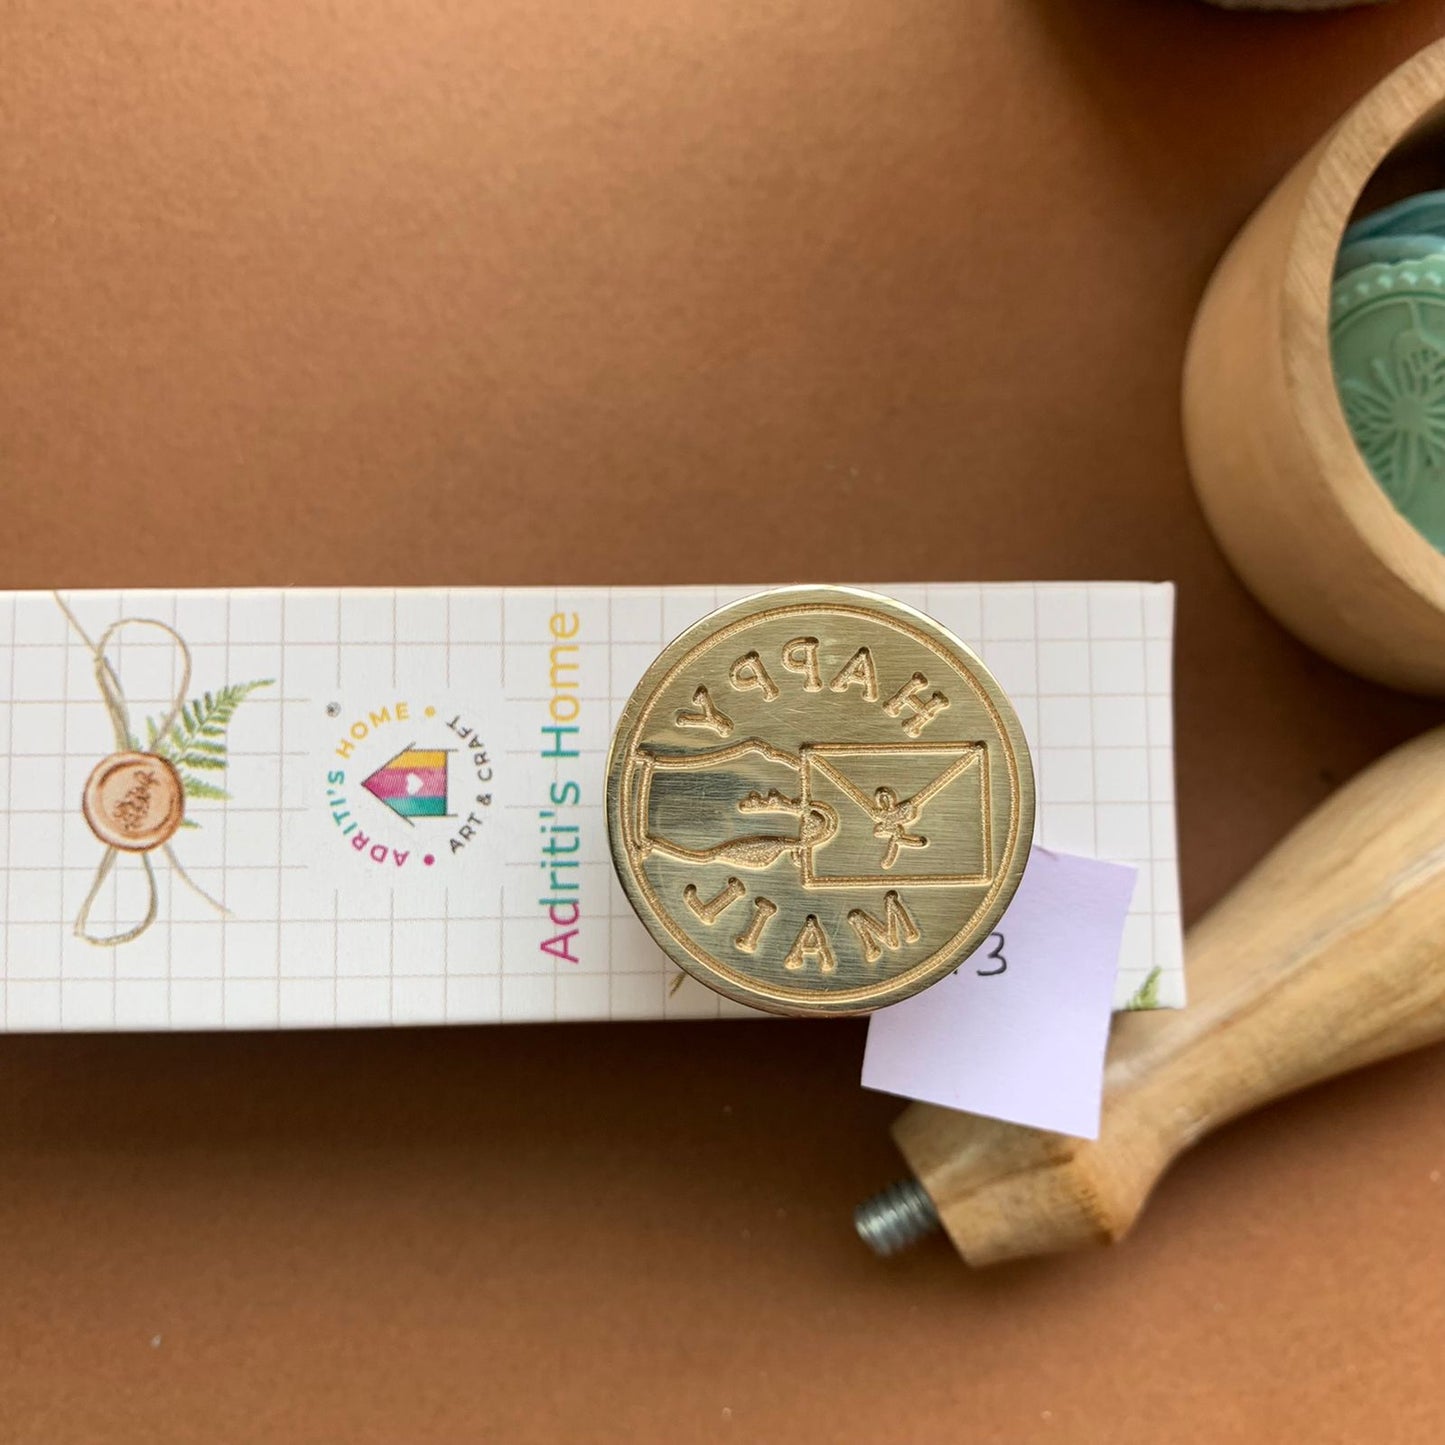 AW13 - Premium Seal Wax Stamp with Wooden Handle | 30mm Diameter